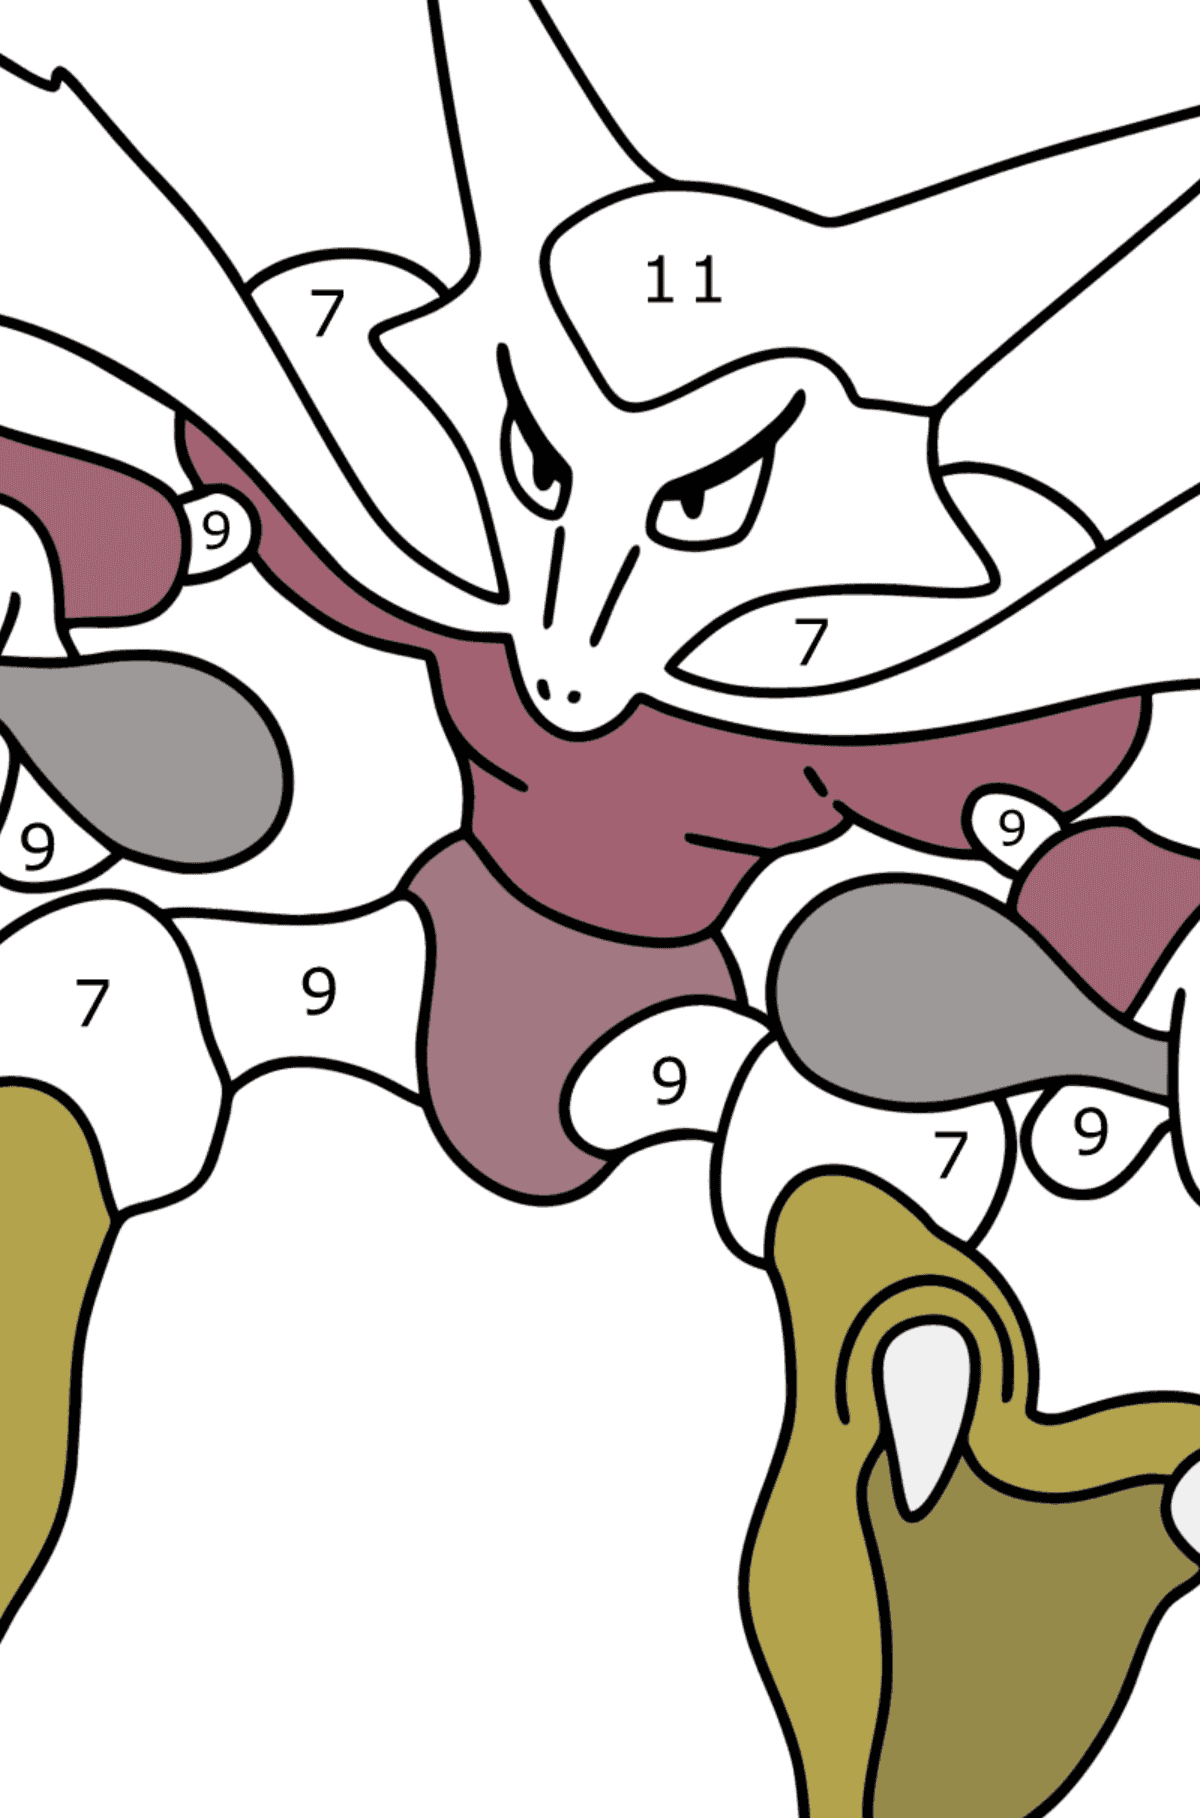 Coloring page Pokemon Go Alakazam - Coloring by Numbers for Kids